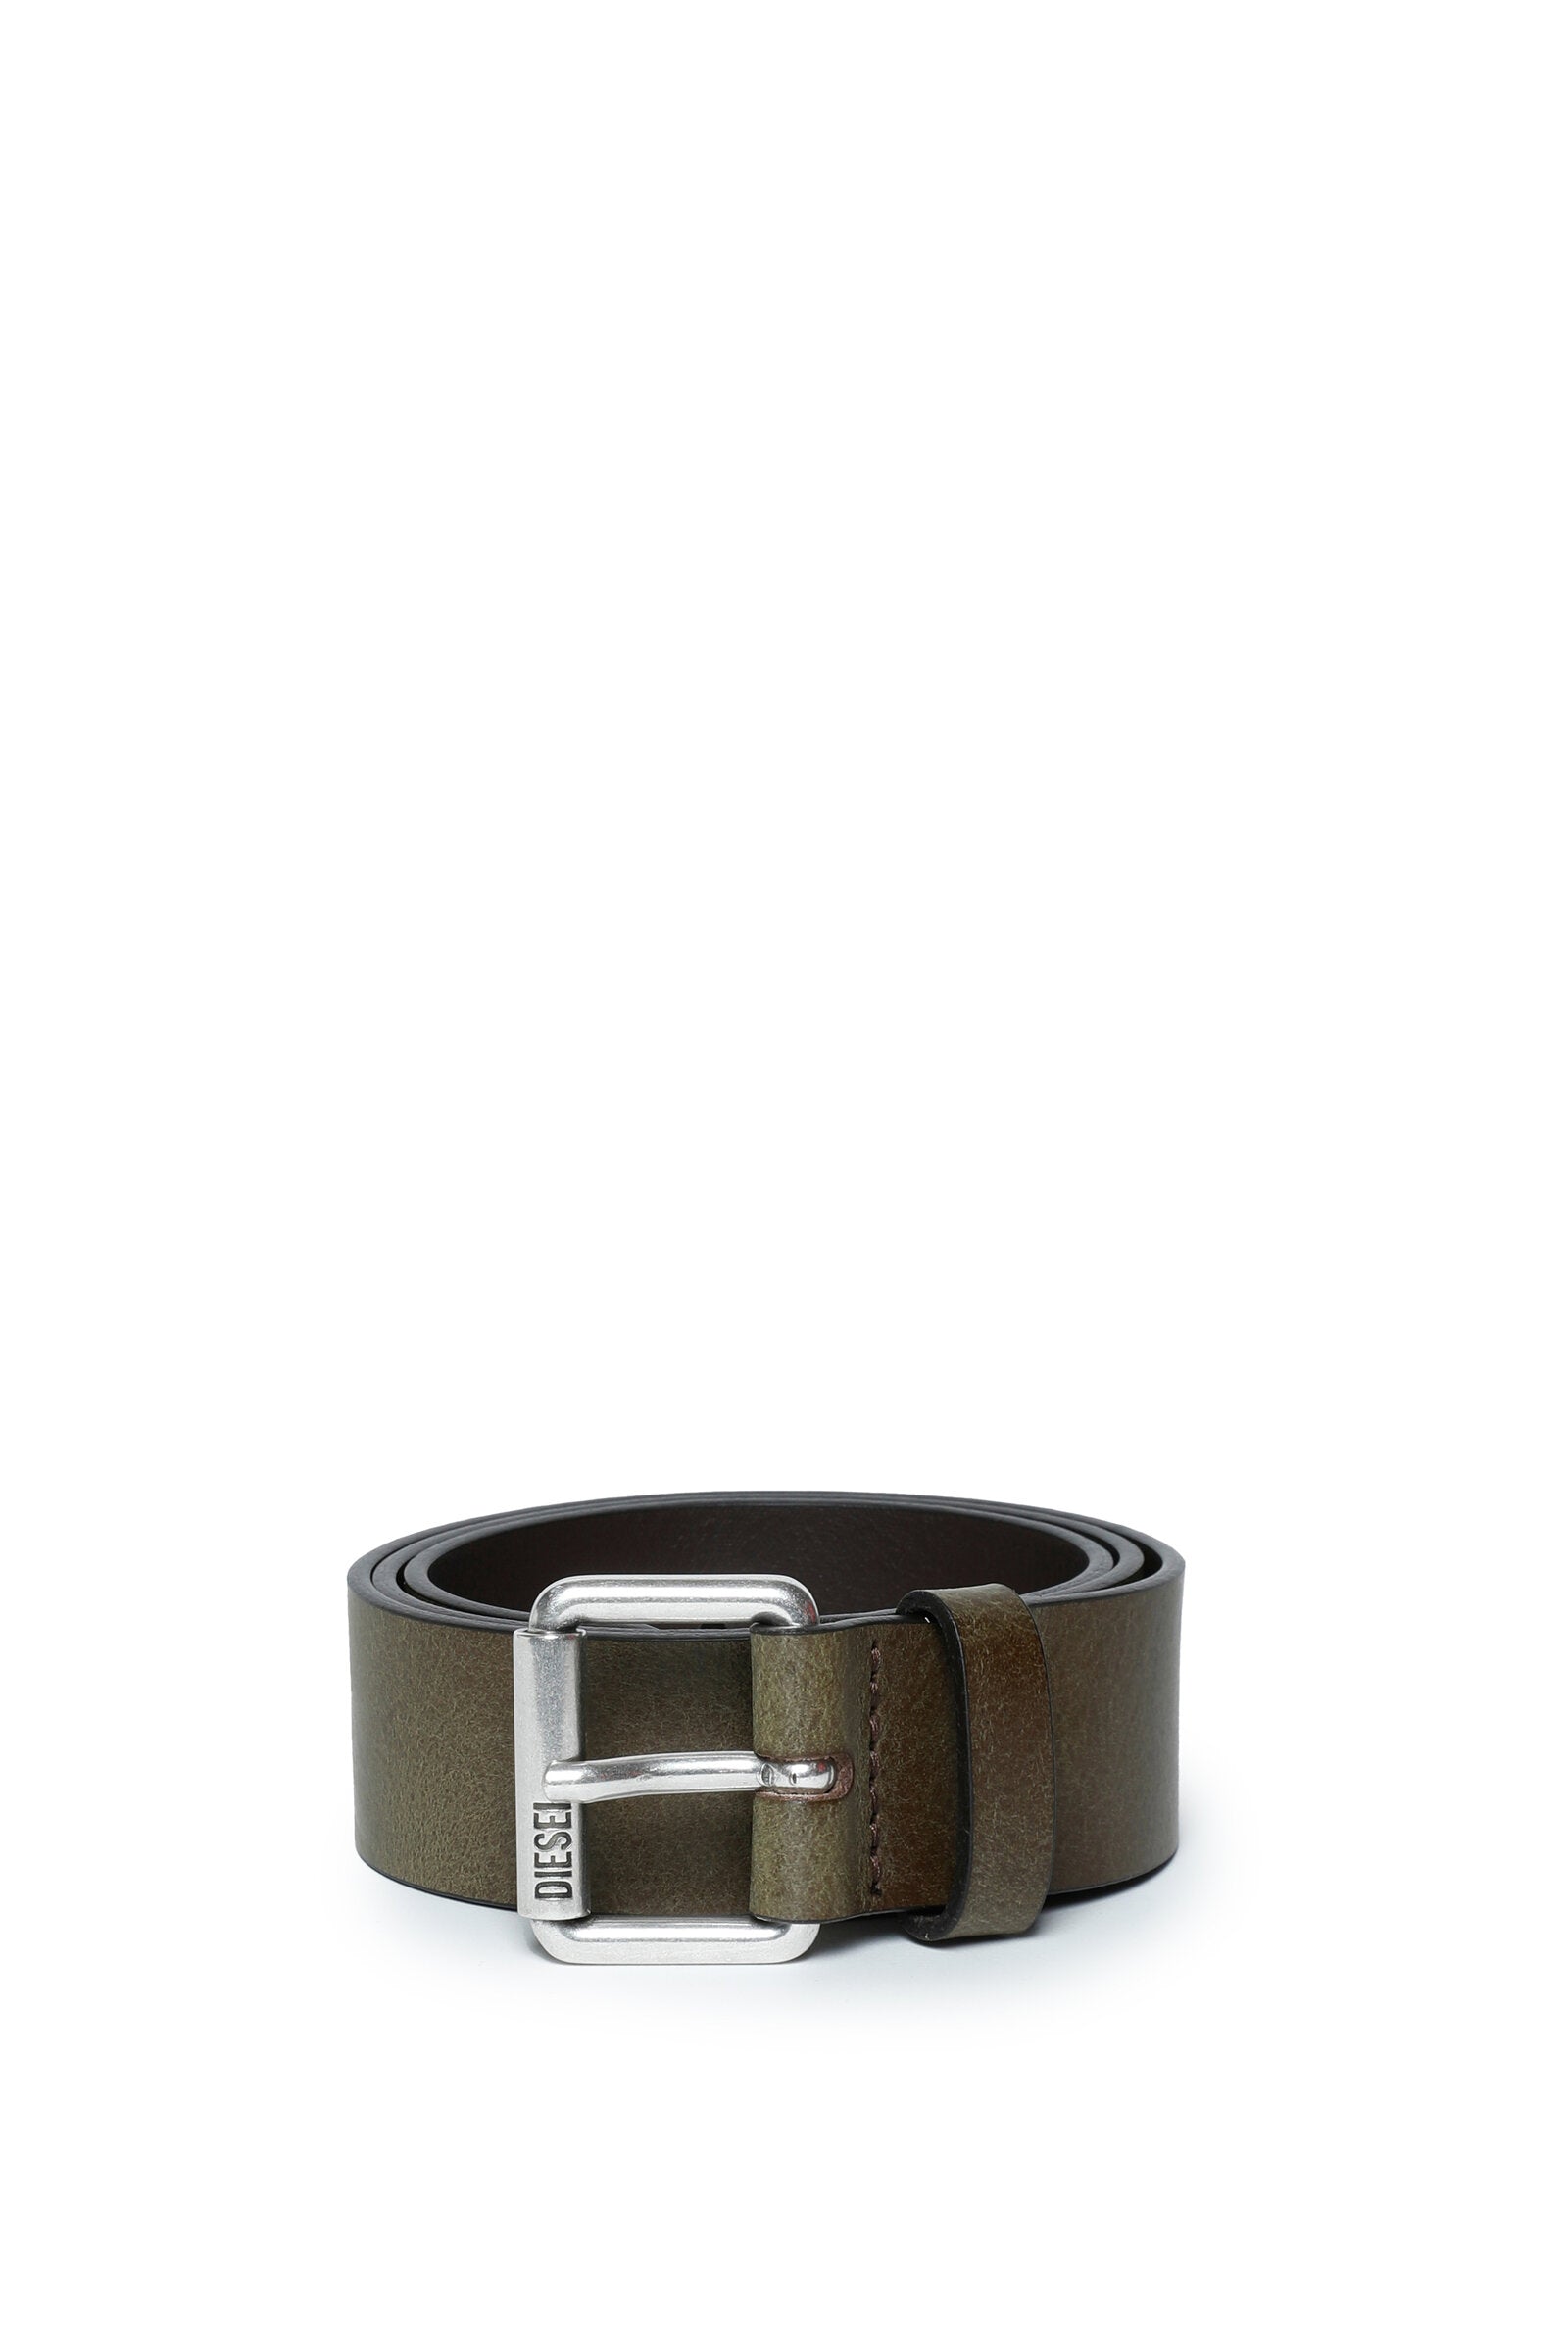 Brown leather belt with logo on buckle